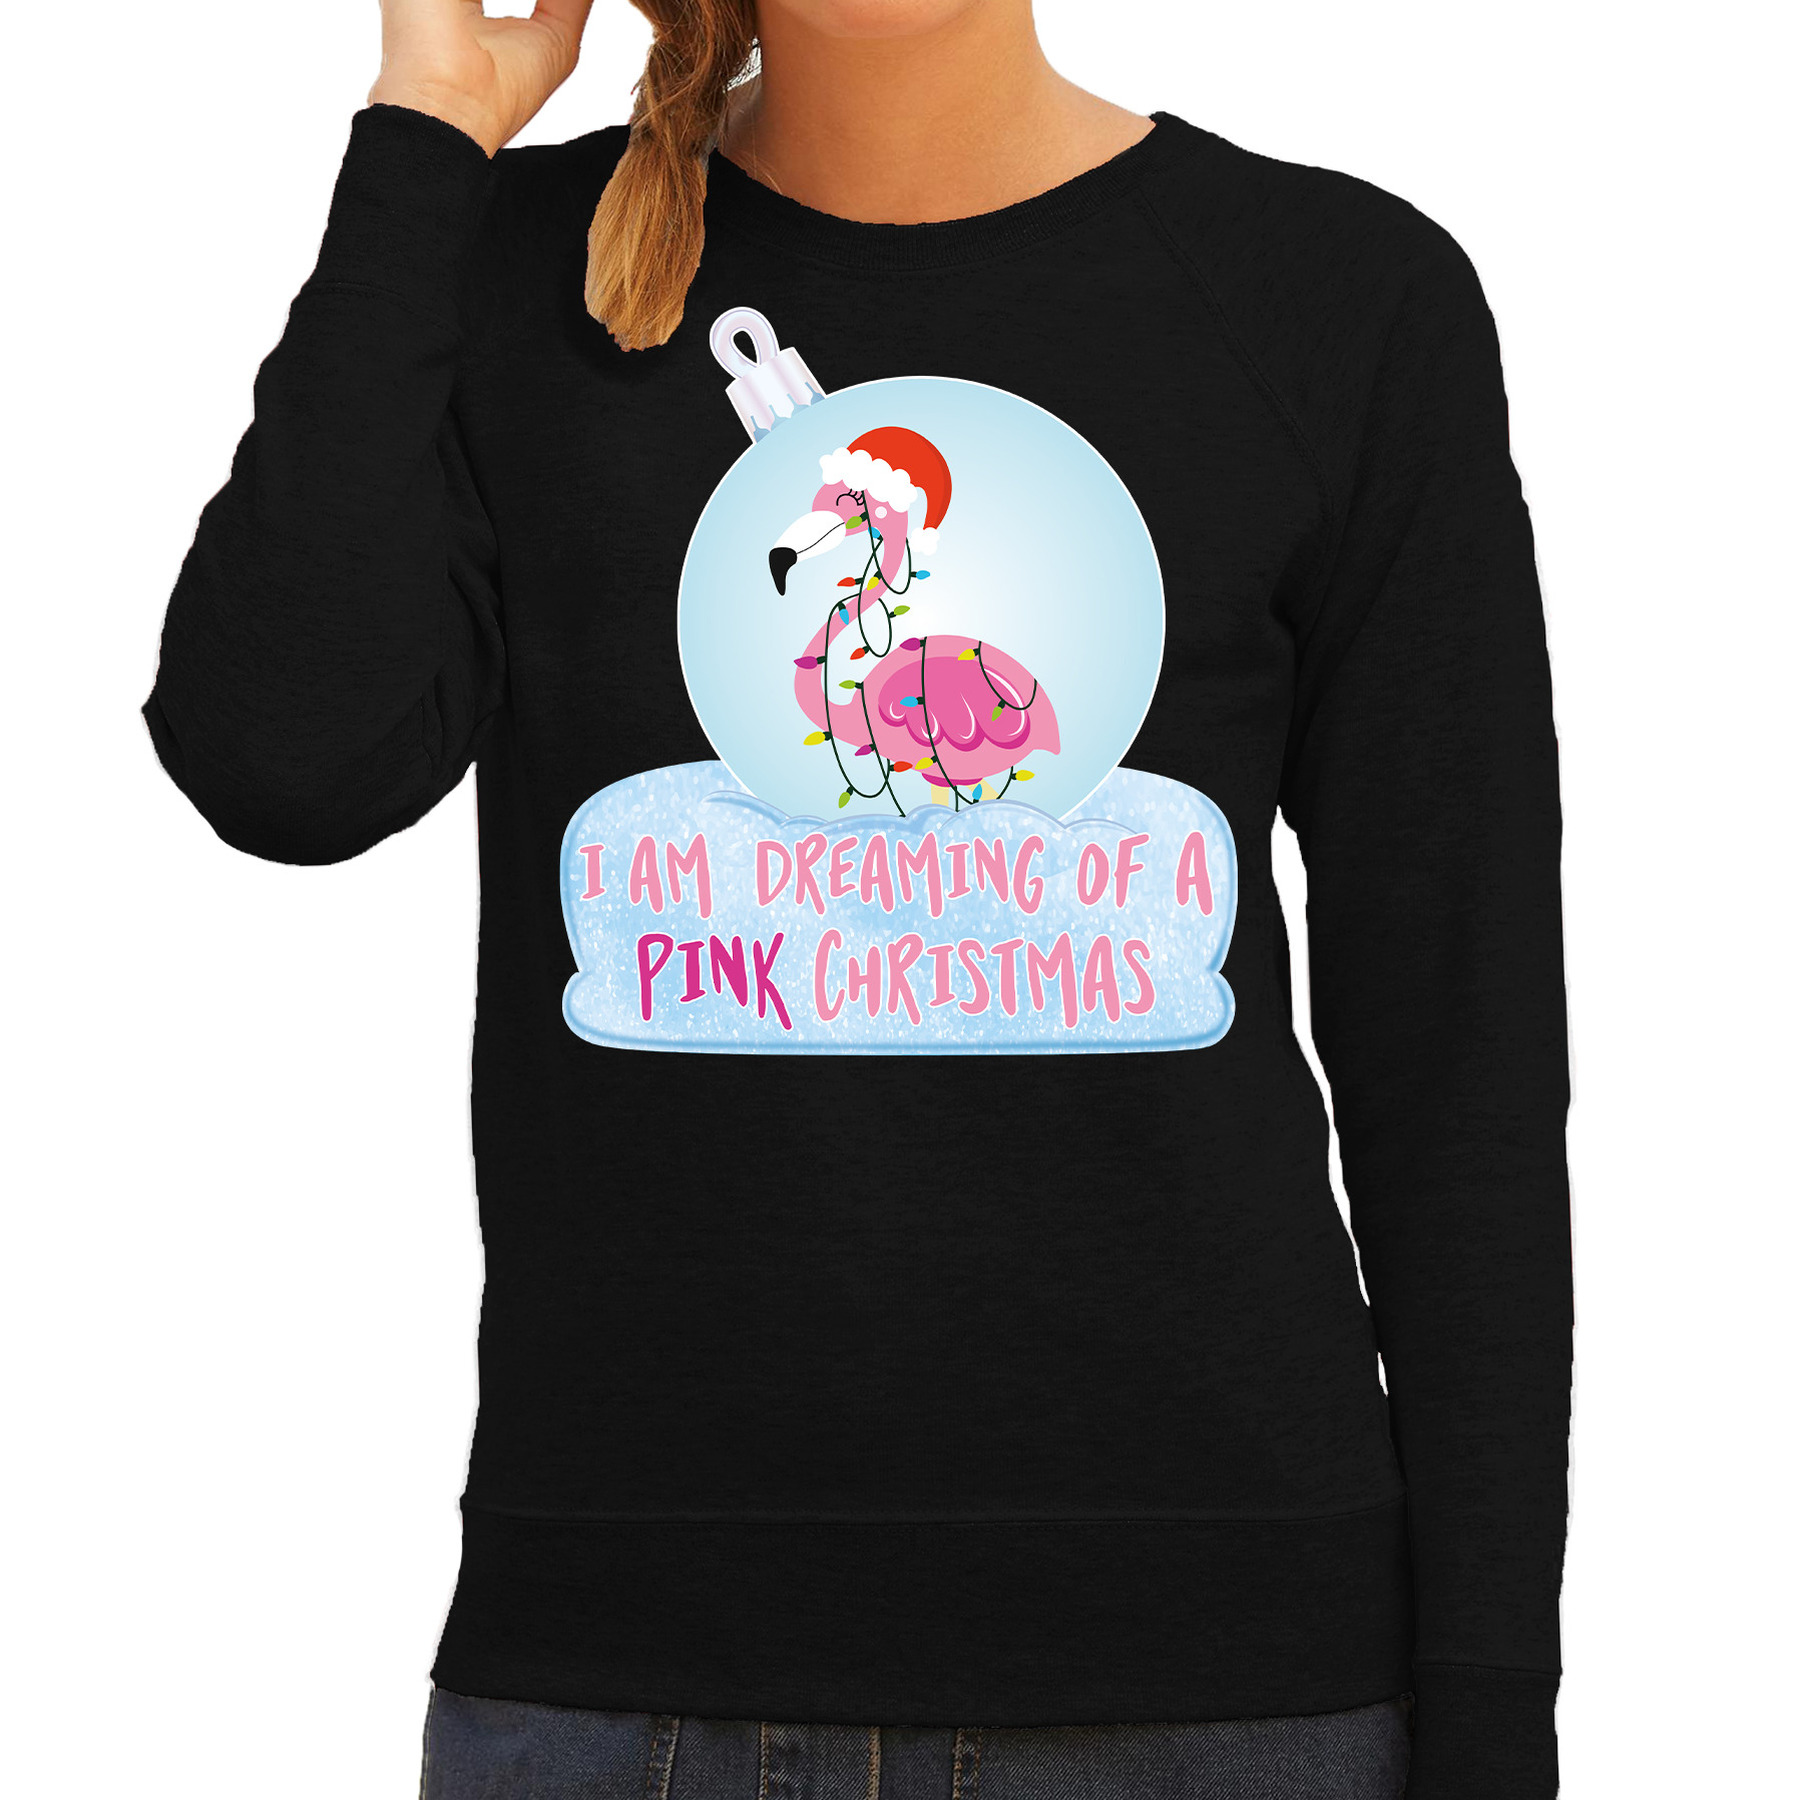 Flamingo Kerstbal sweater-Kerst outfit I am dreaming of a pink Christmas zwart voor dames